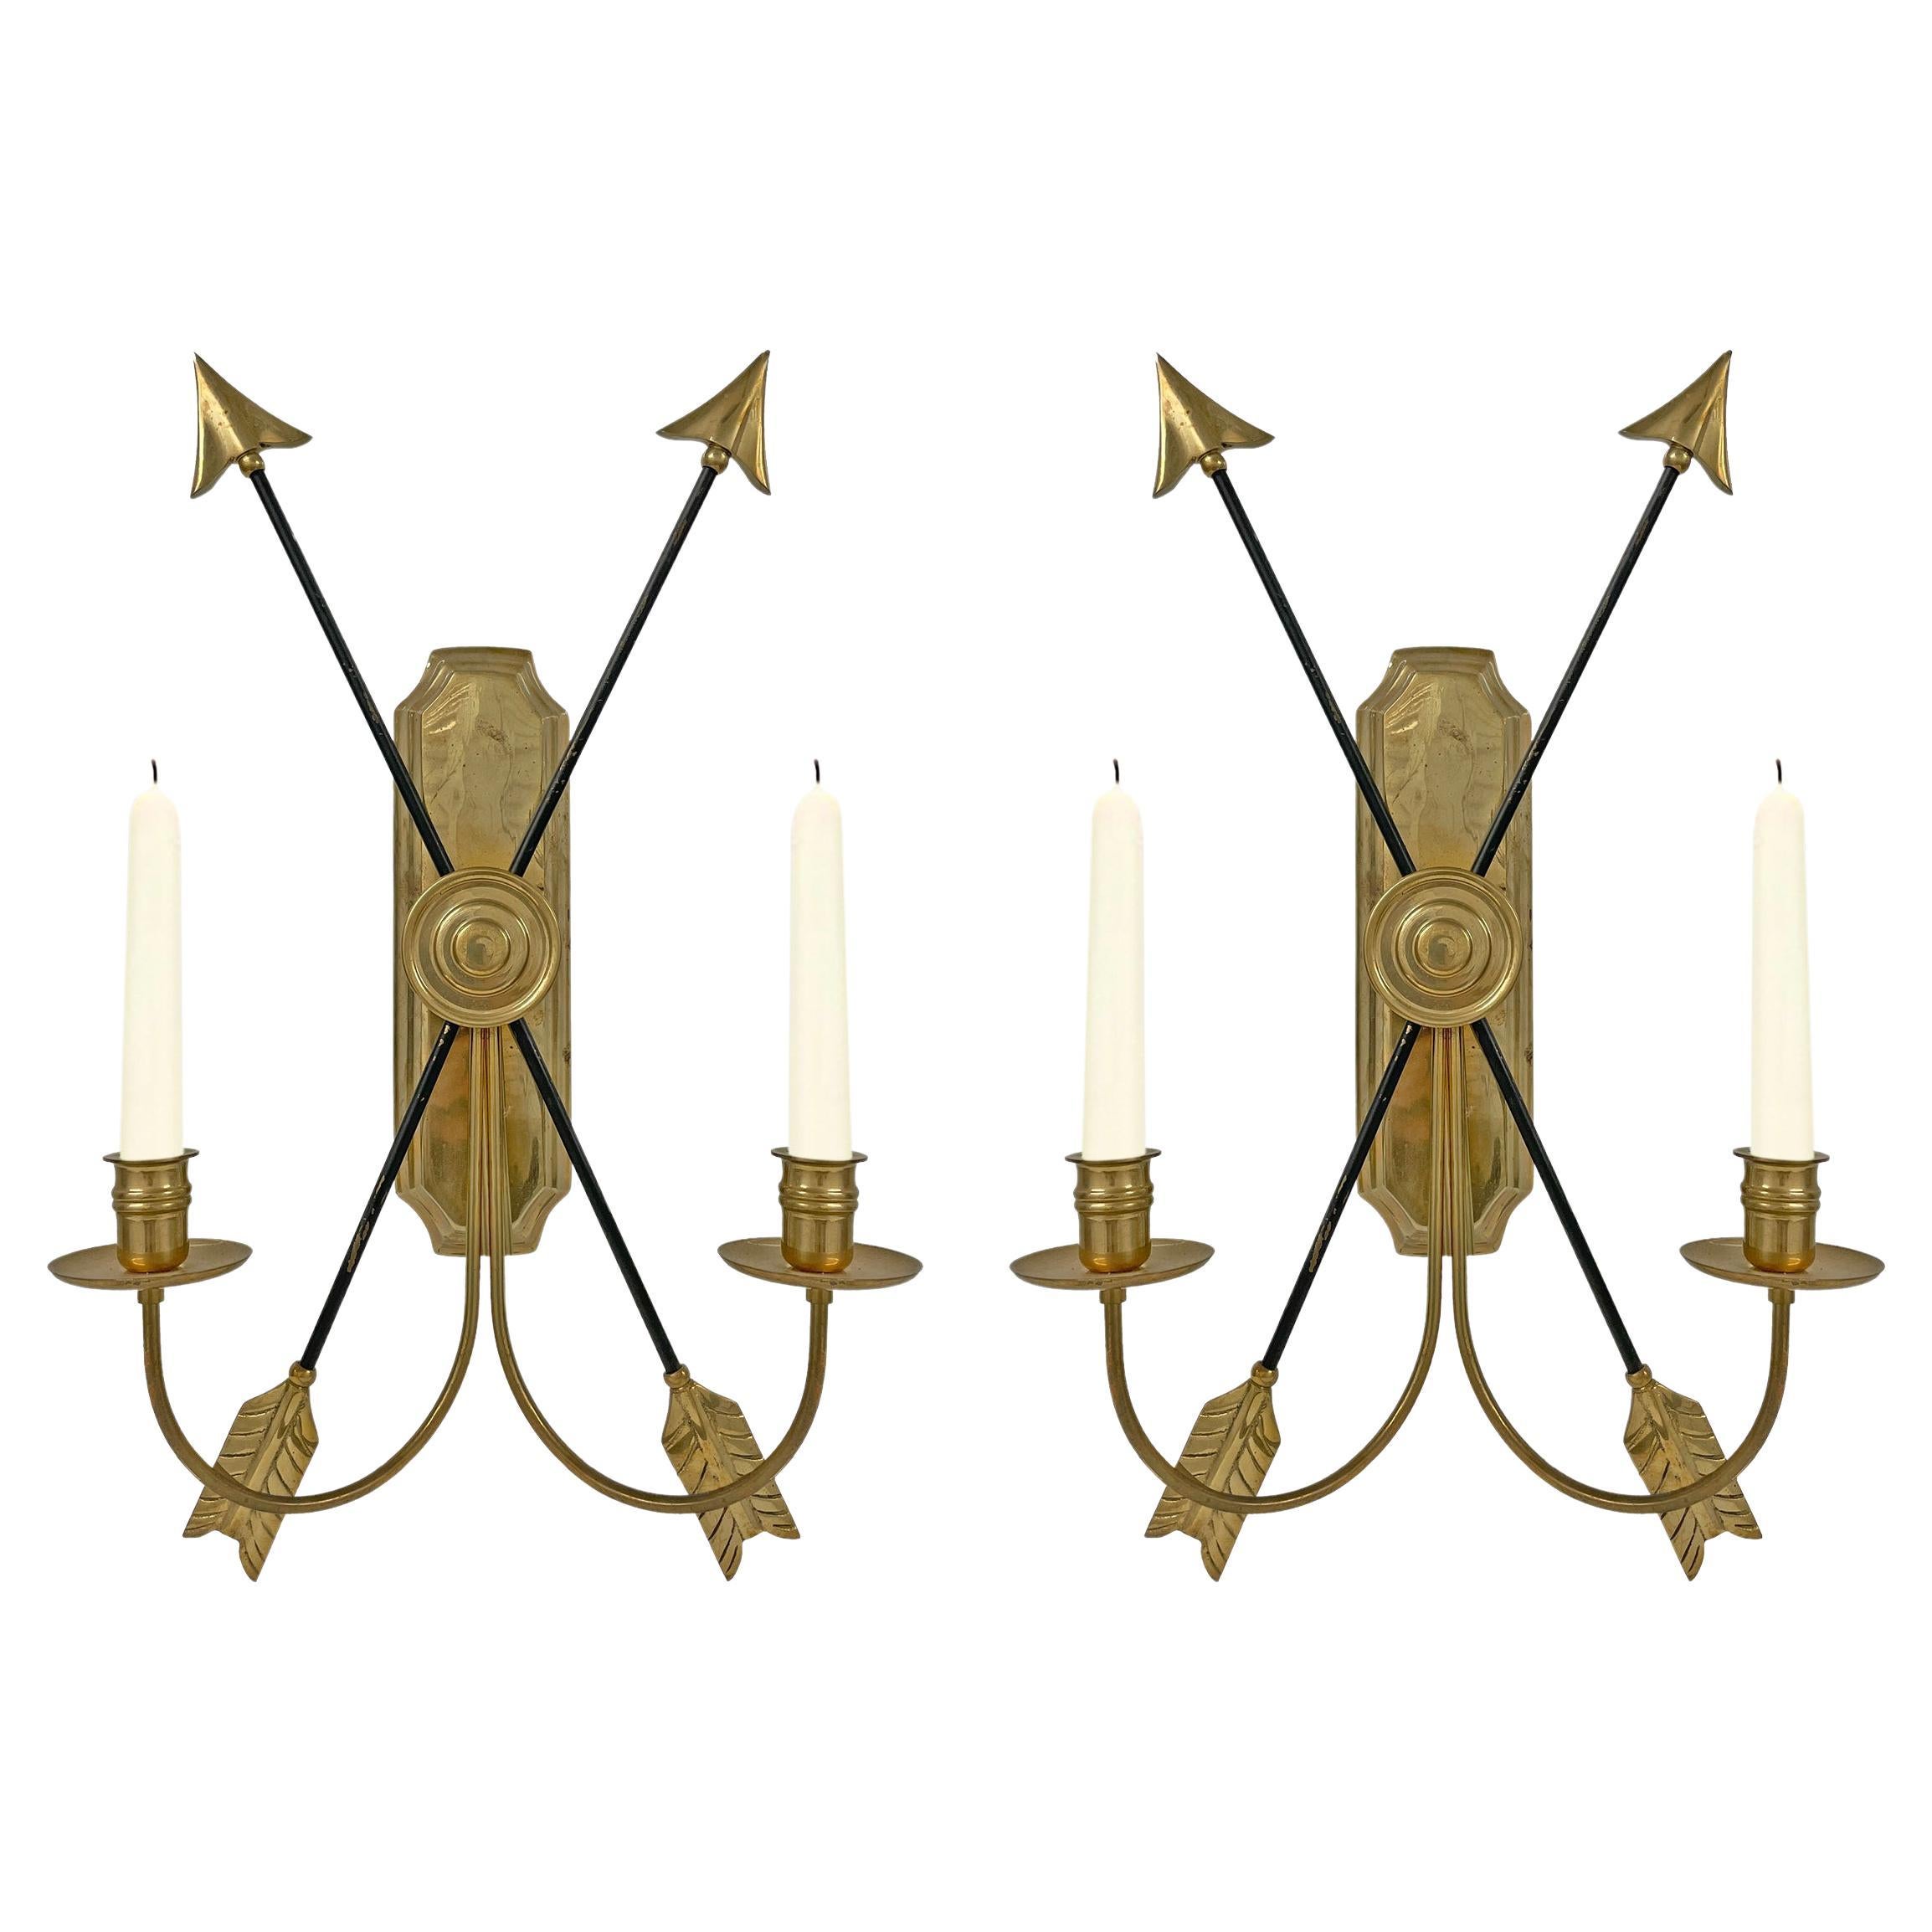 Pair of Mid-20th Century Empire-Style Candle Sconces